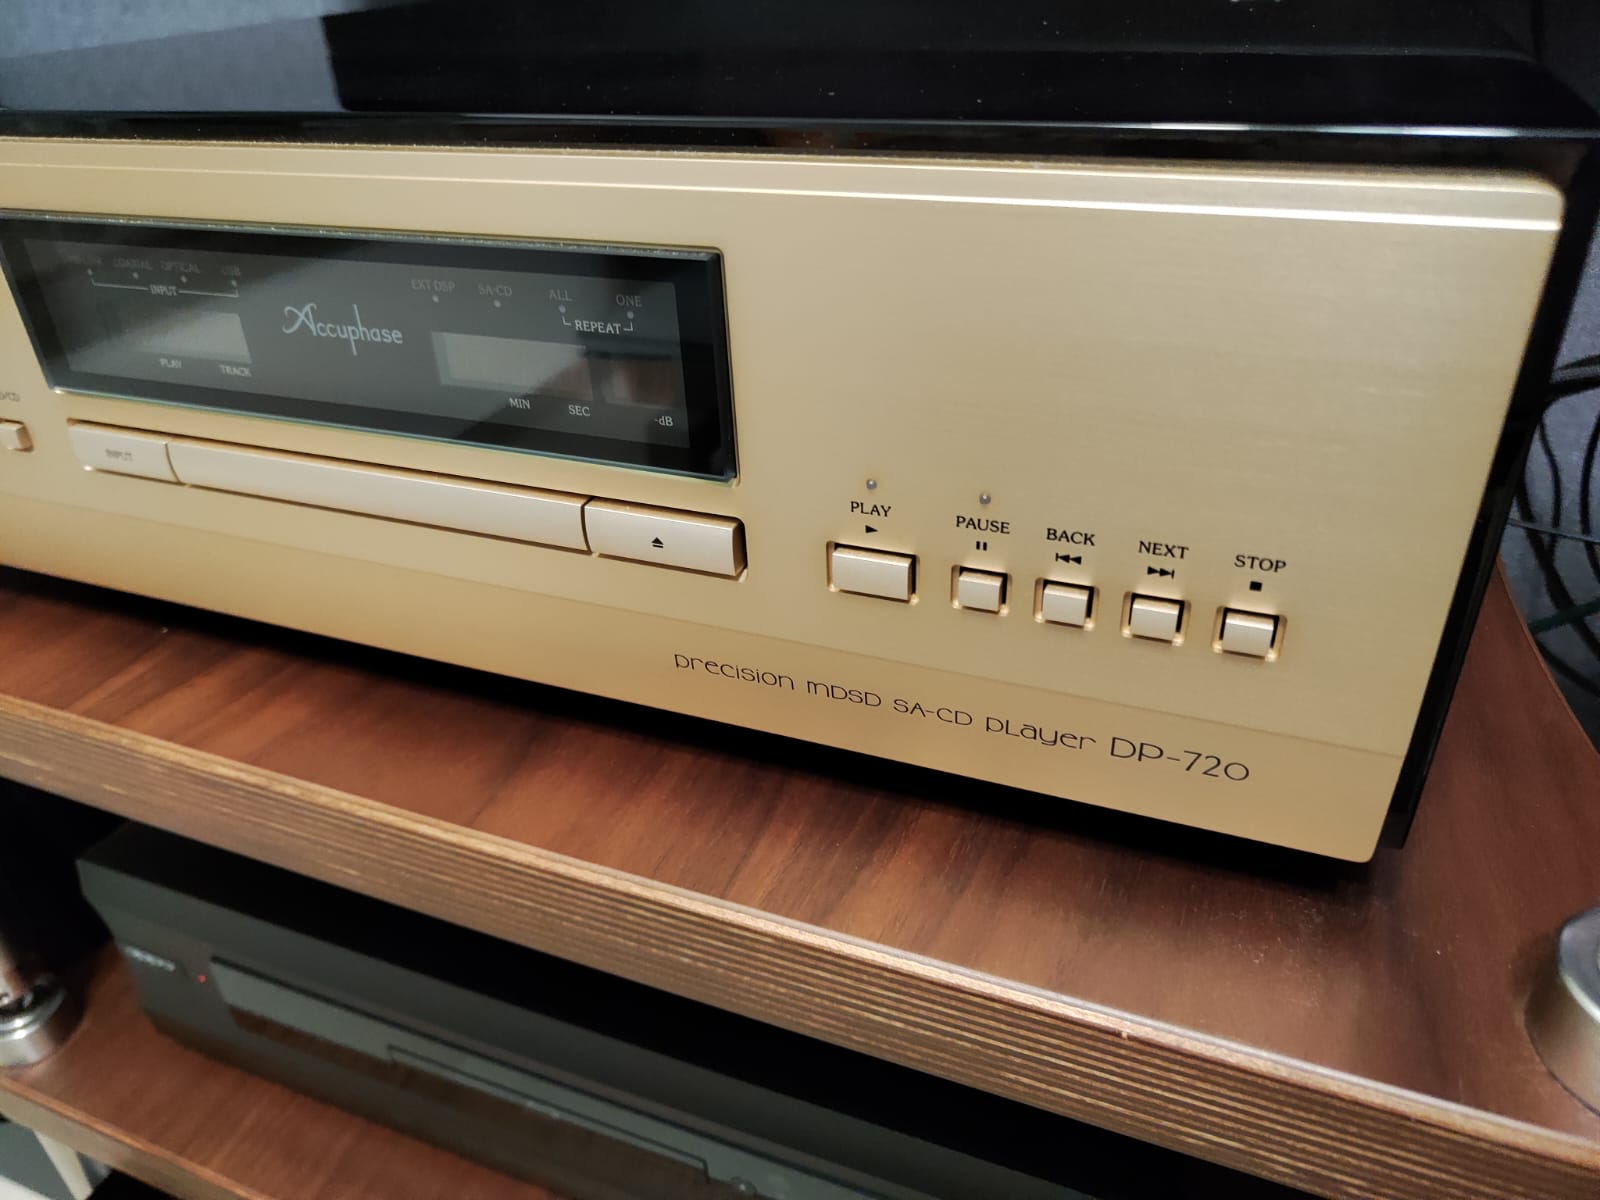 Accuphase CDプレーヤー用リモコン☆ 適応機種： Accuphase DP-700 